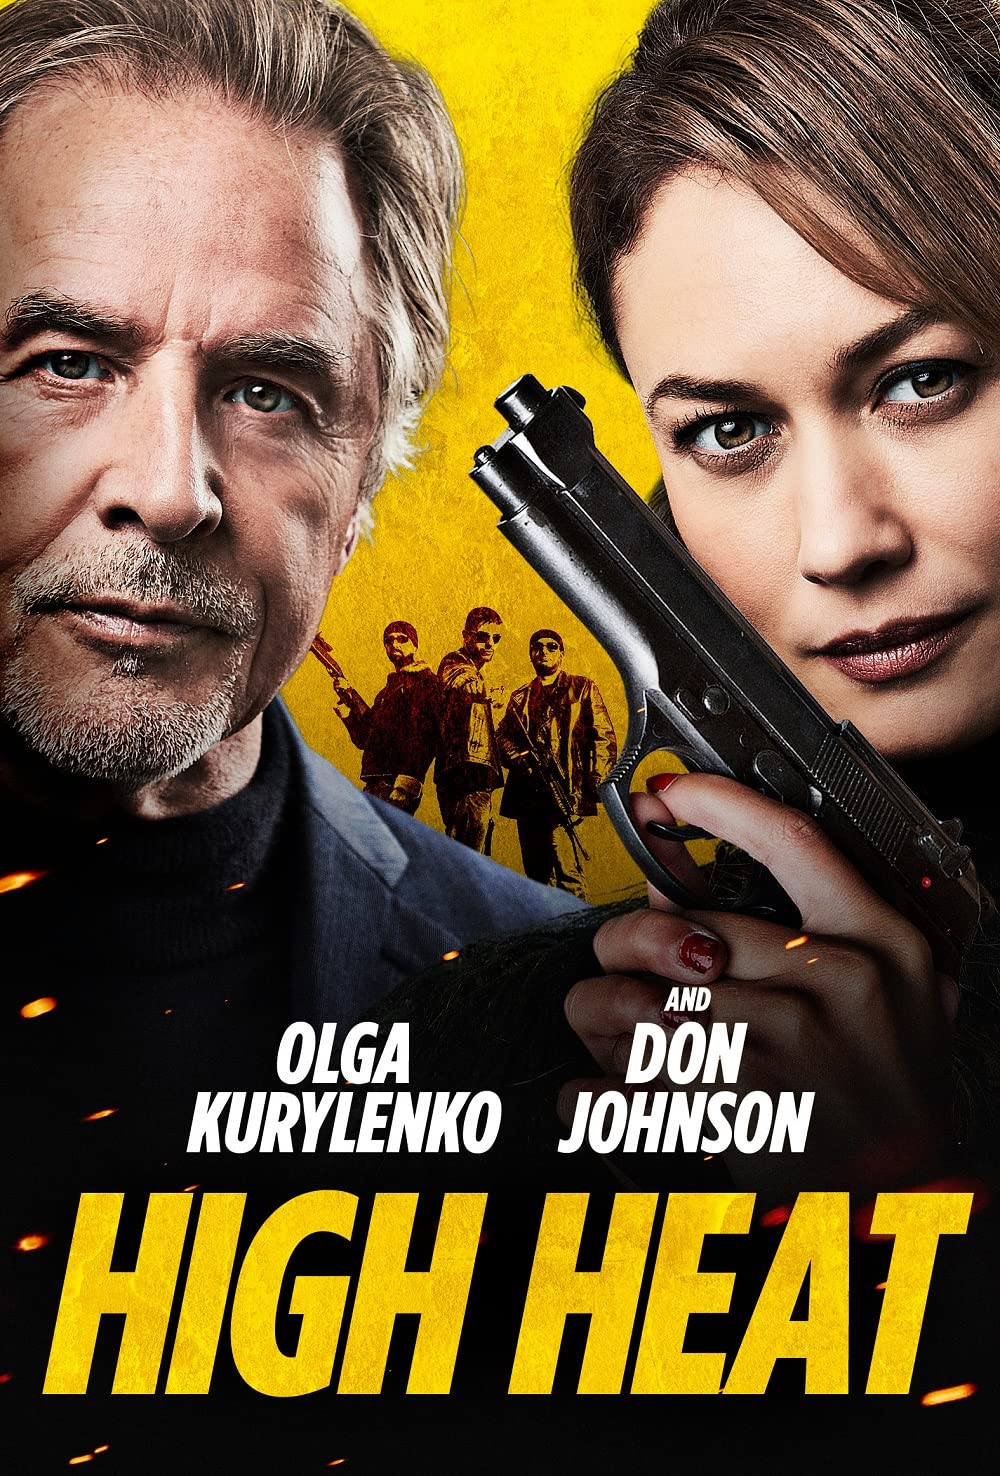  High Heat Movie 2022, Official Trailer, Release Date, HD Poster